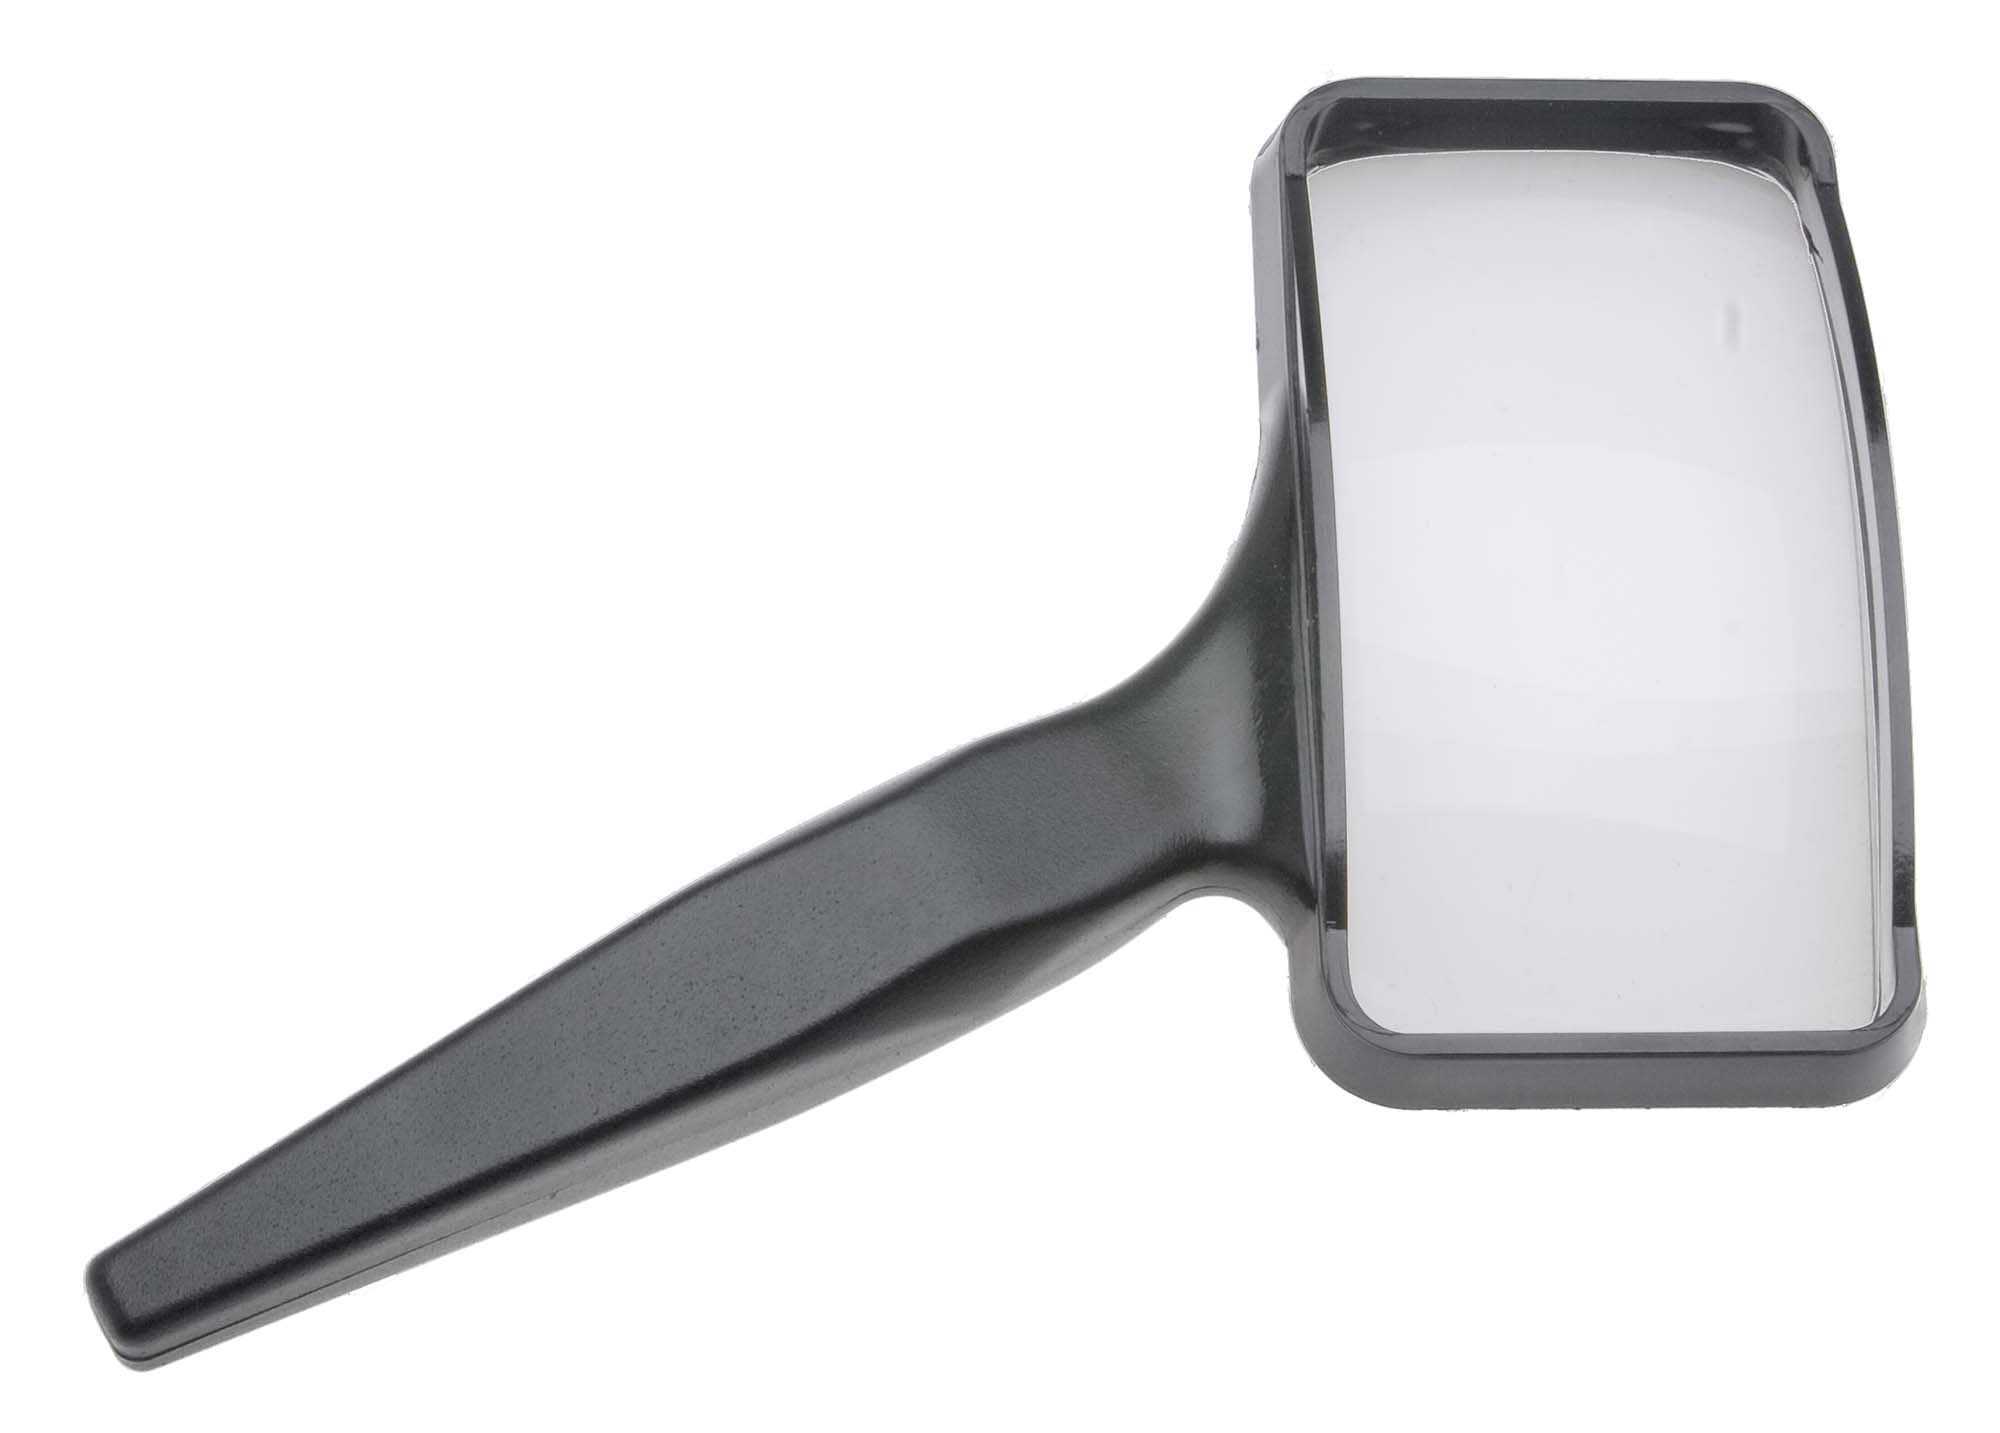 Donegan Optical A-2024 3 Power Aspheric Magnifying Glass -  2" x 4"